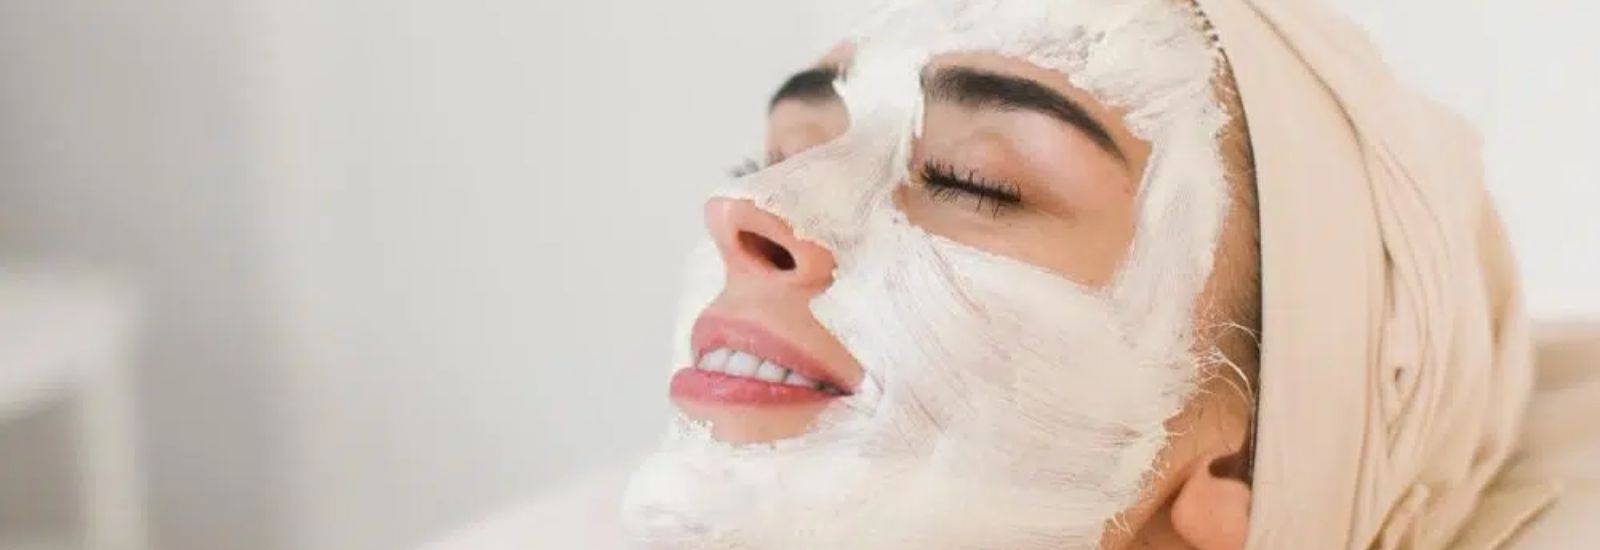 Woman in chemical peel treatment